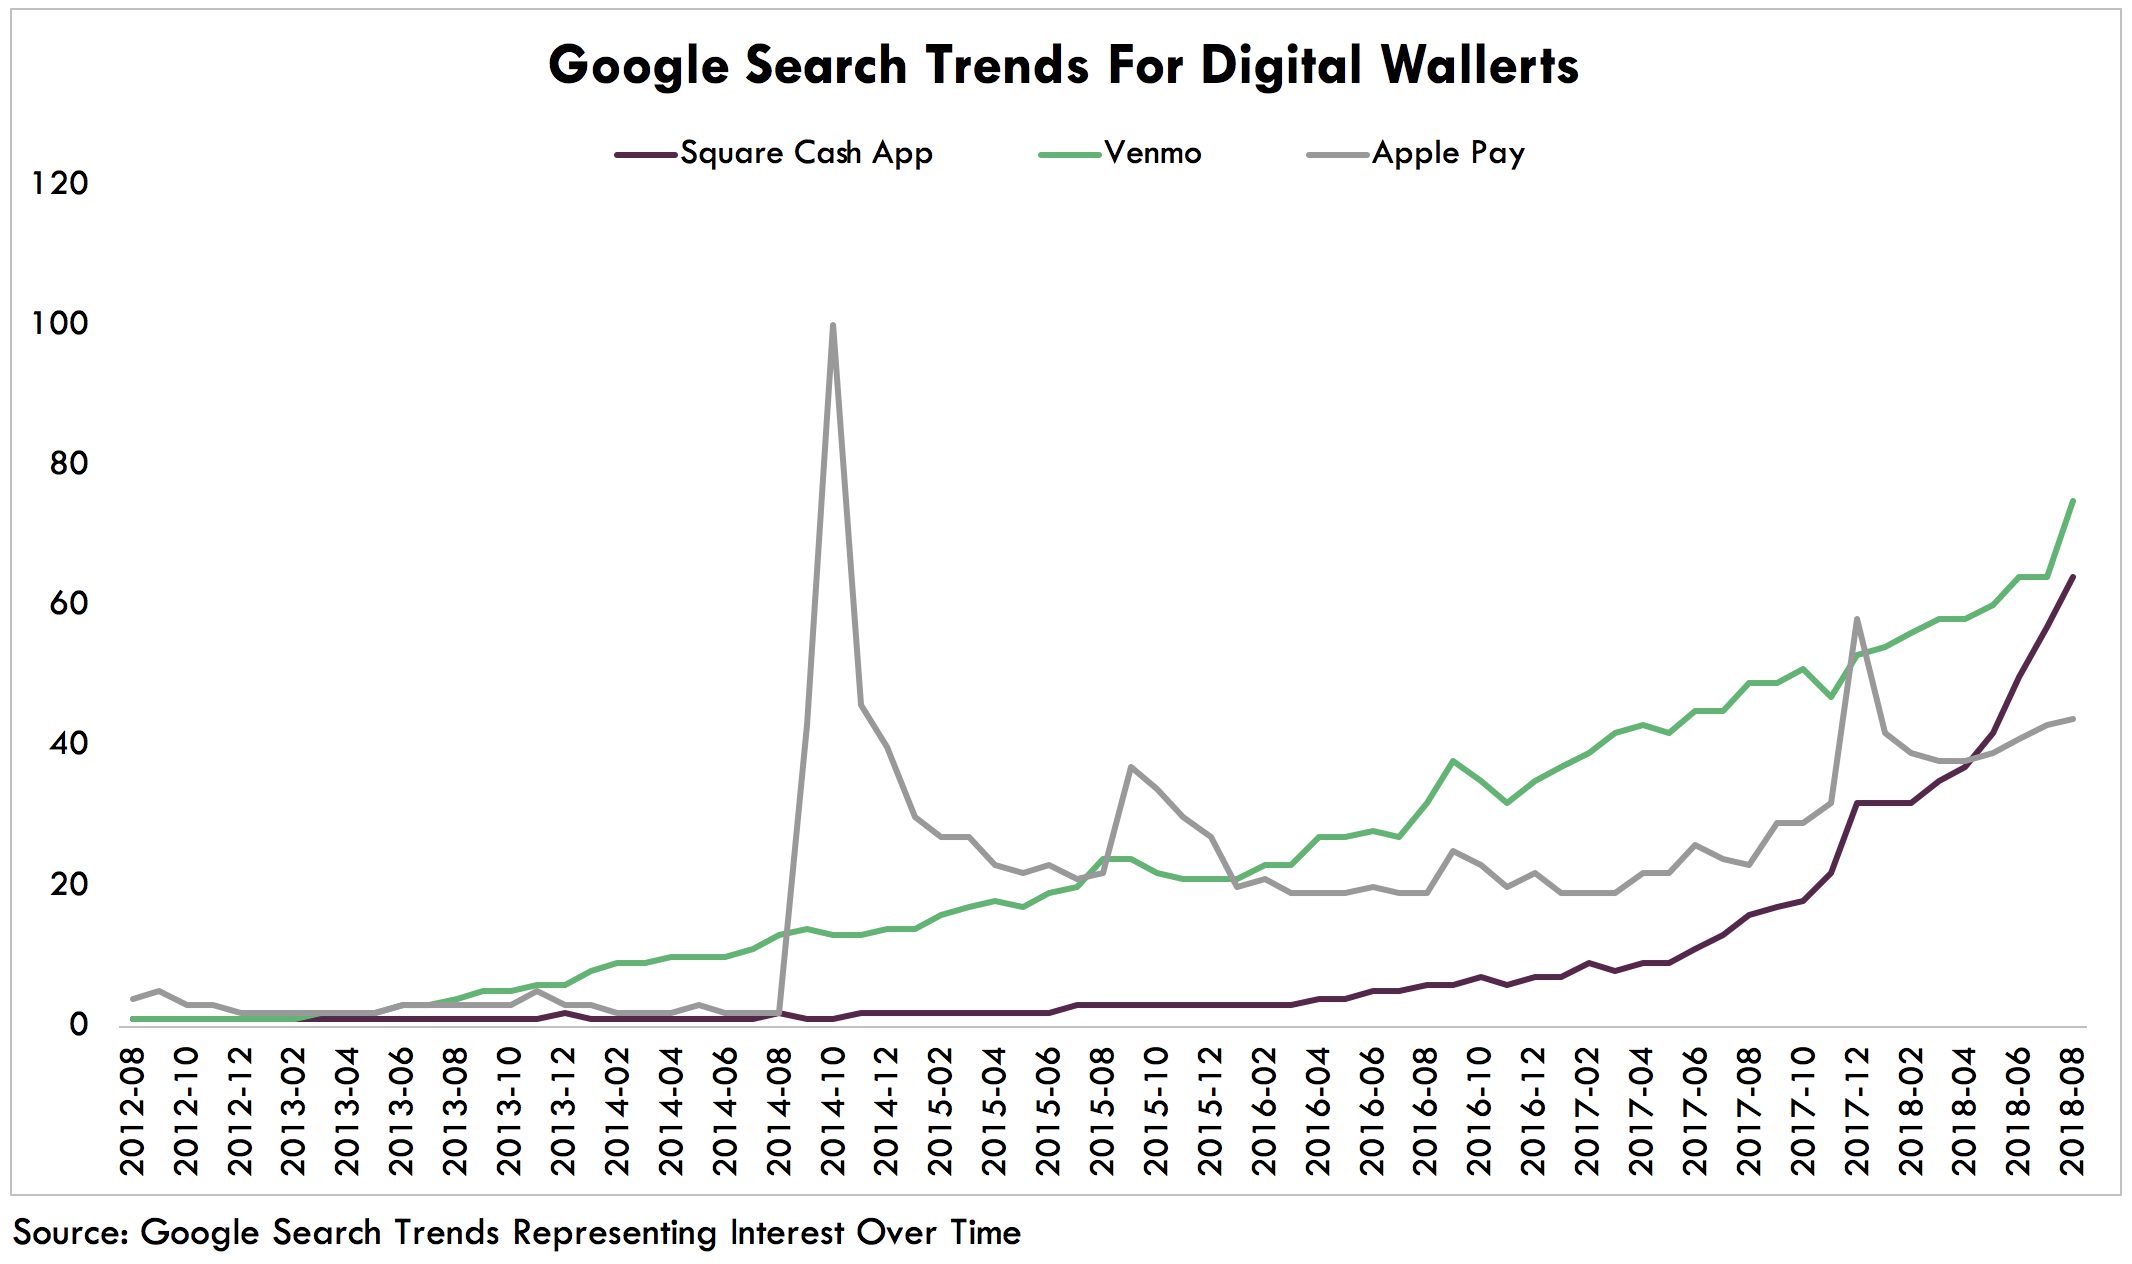 ARK Invest Google Search Trends for Digital Wallets